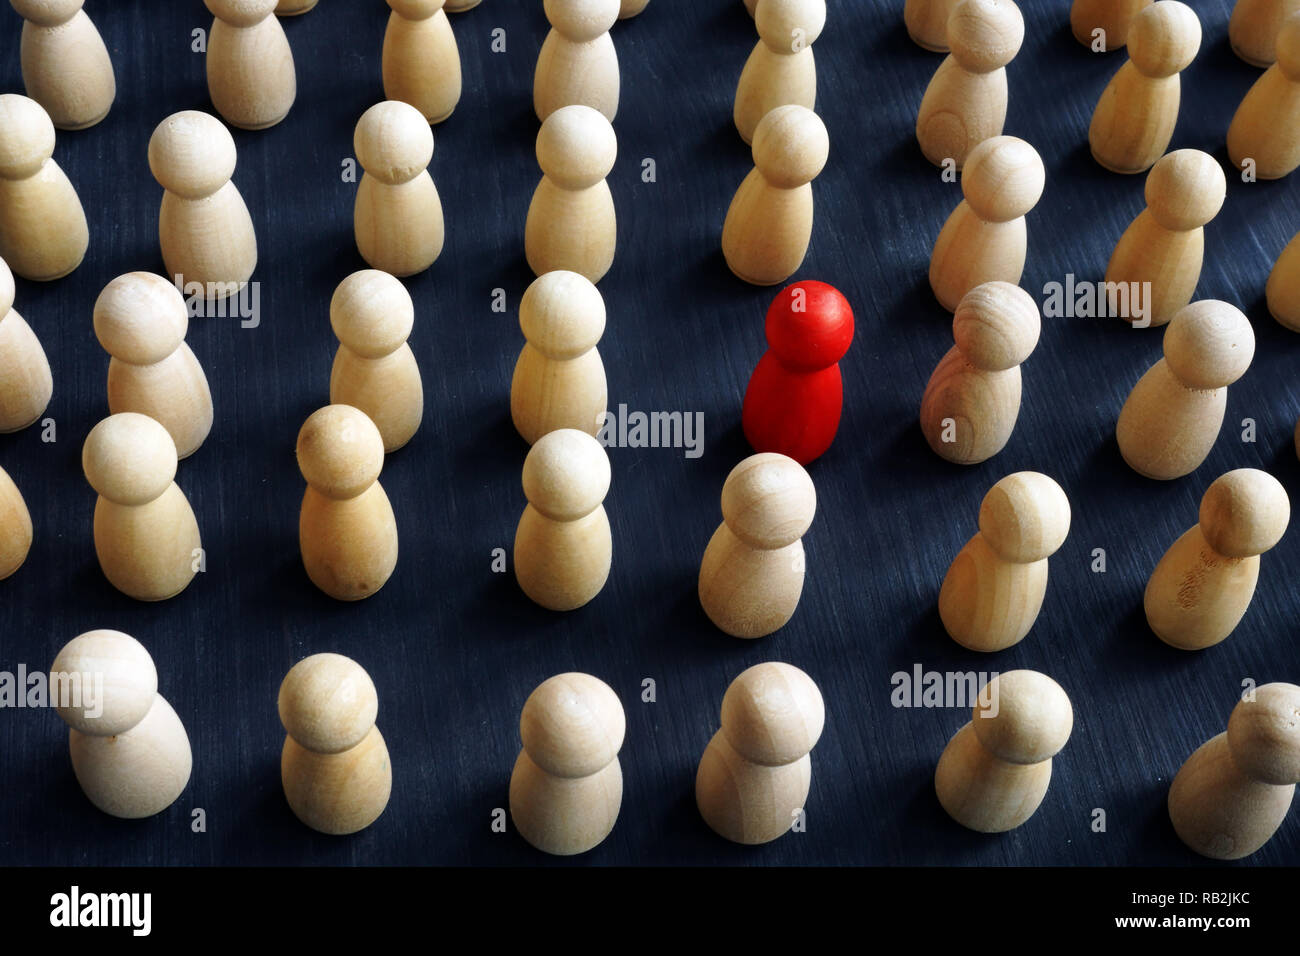 Unique, individual and think differently. Crowd of wooden figures and red one. Stock Photo